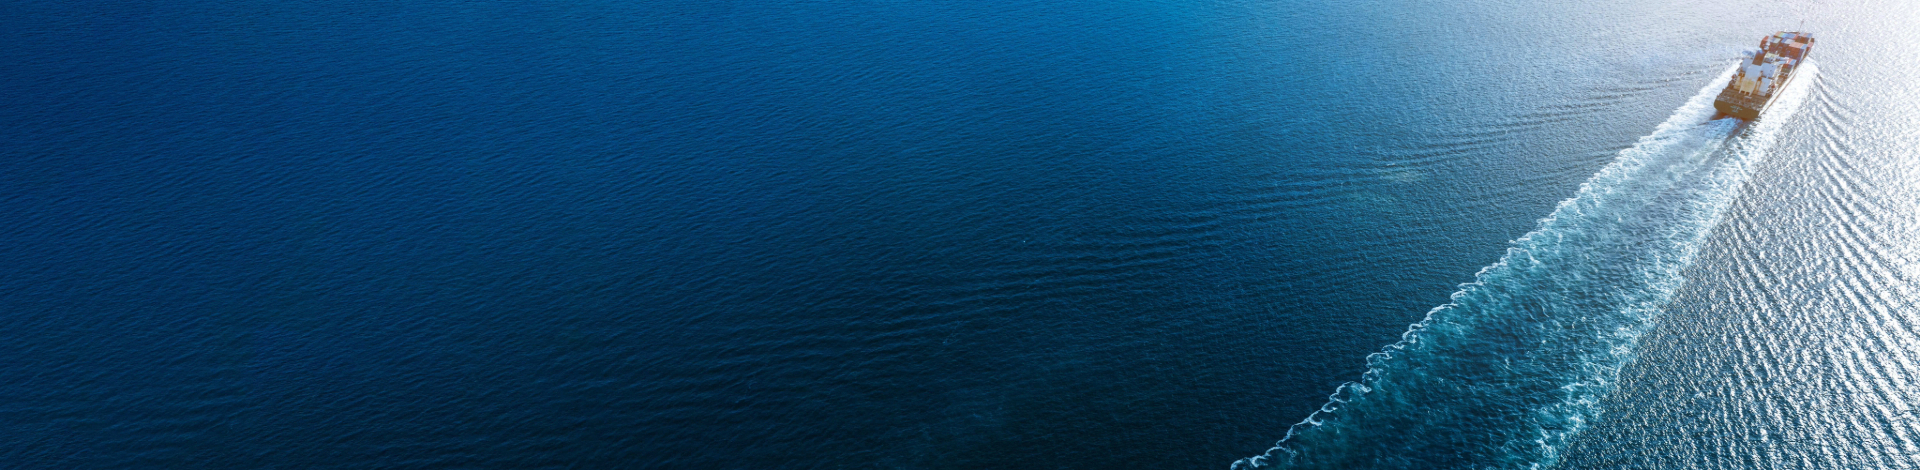 Aerial view of a large cargo ship traveling through a deep blue sea, leaving a long, white wake behind it.